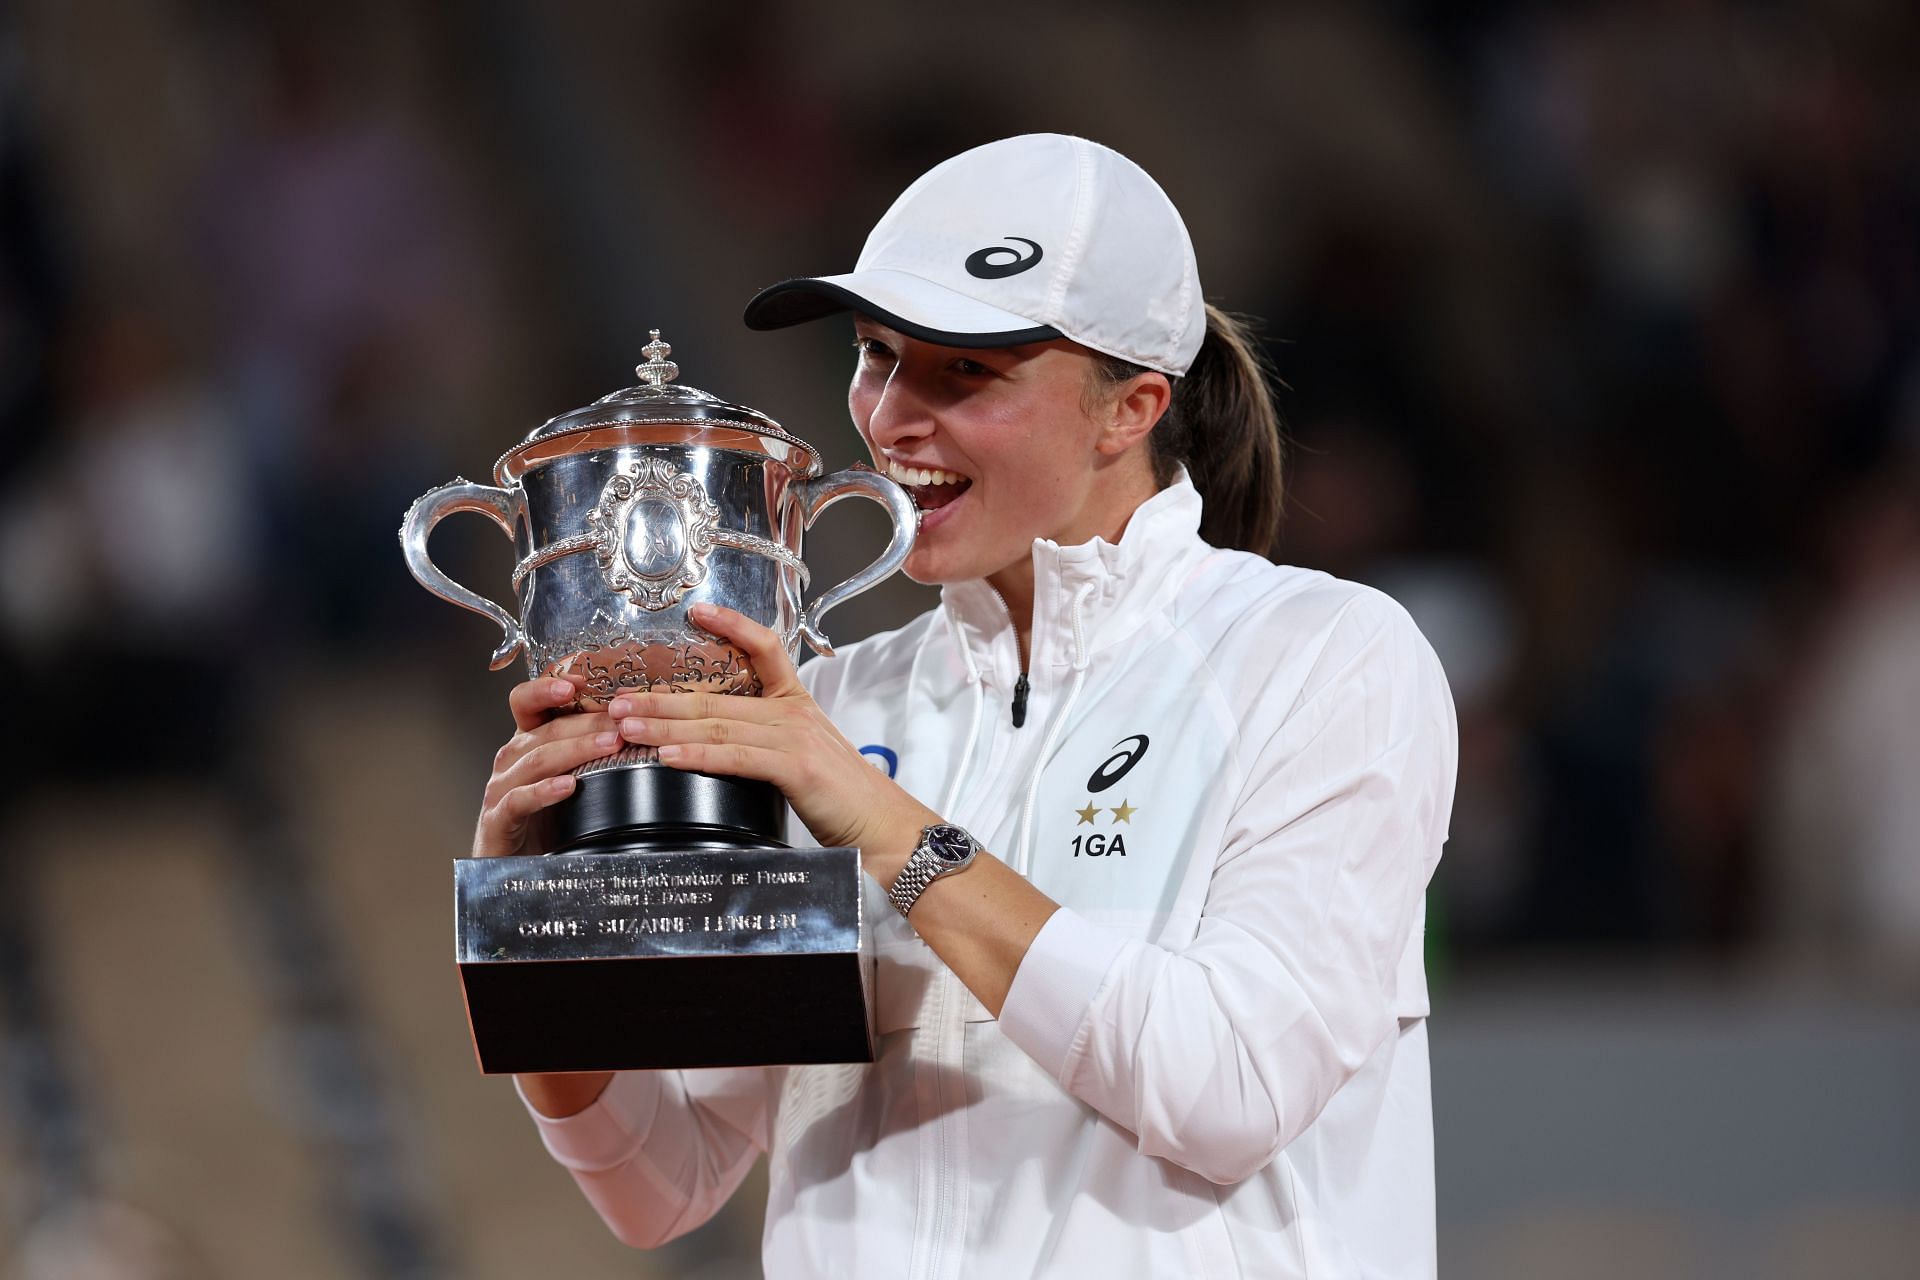 Iga Swiatek won her ninth straight title at the 2022 French Open.